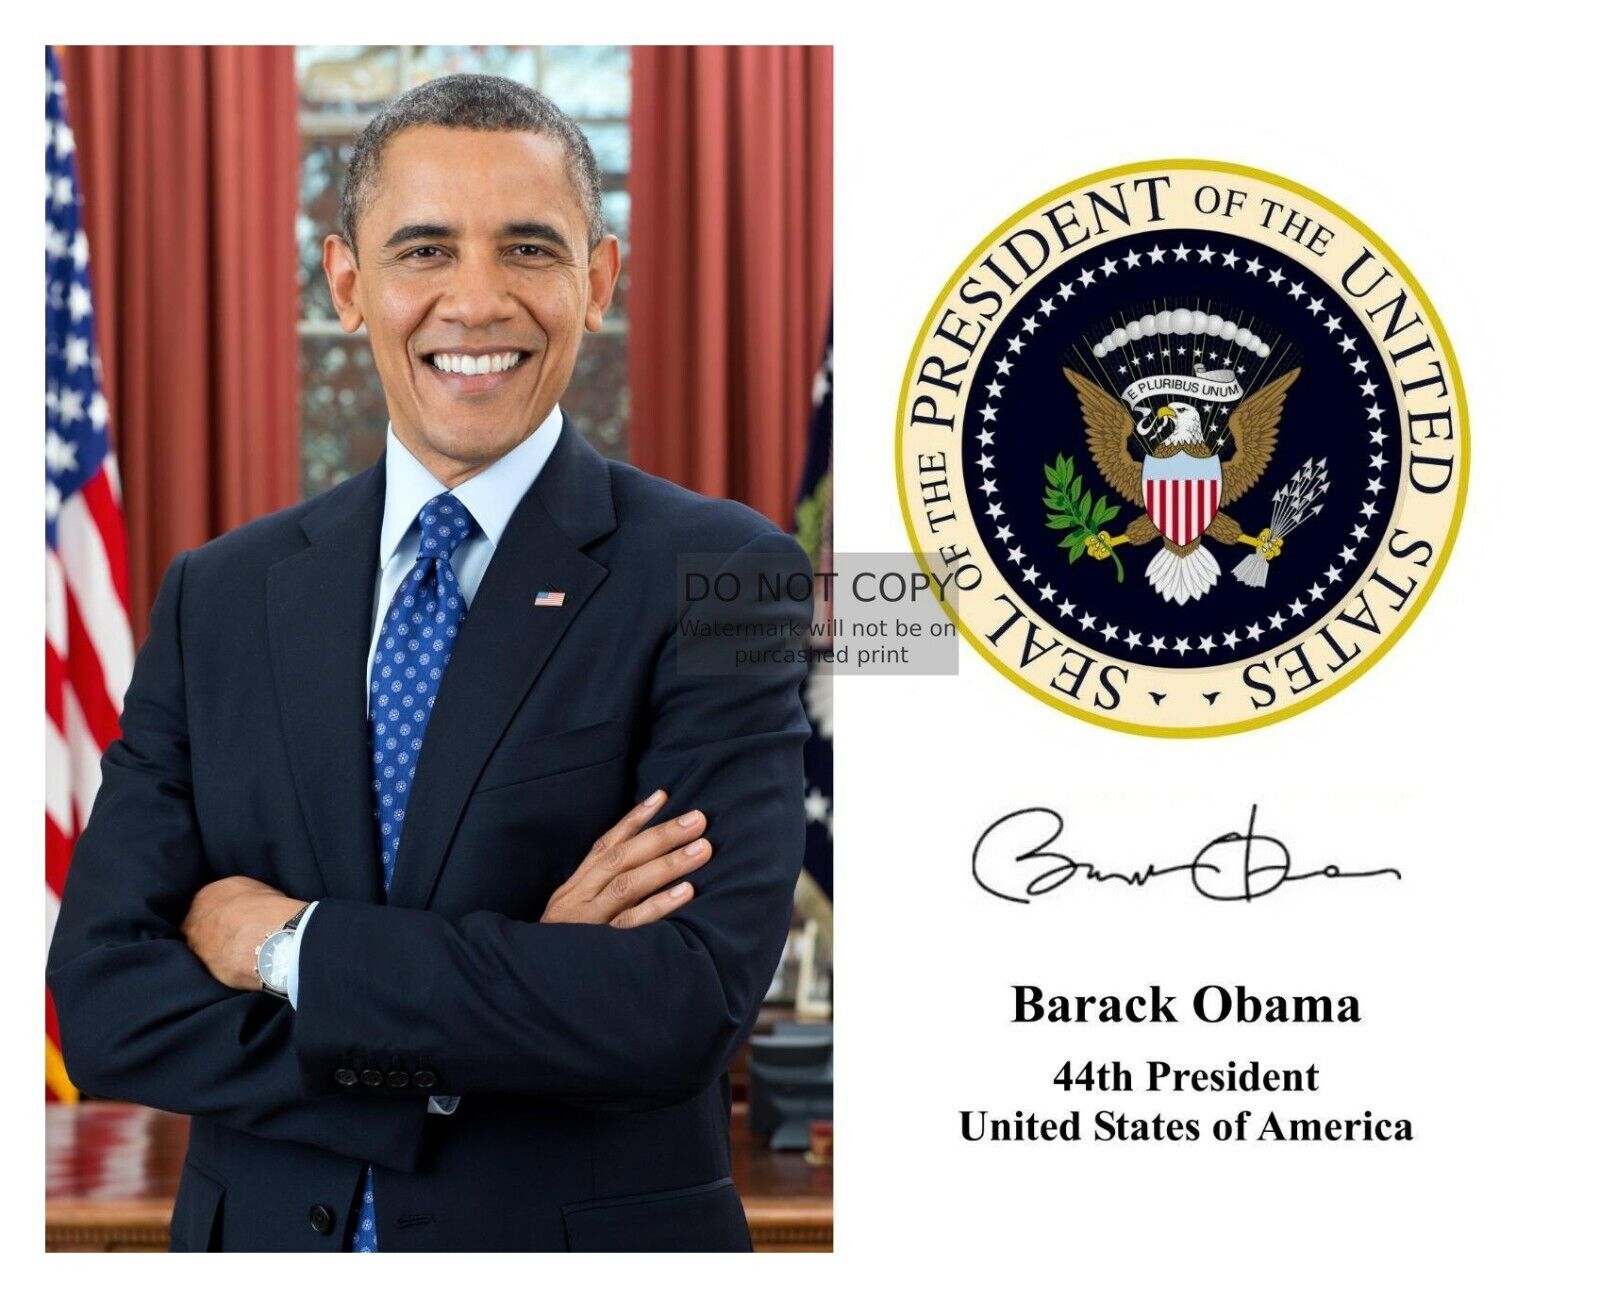 PRESIDENT BARACK OBAMA PRESIDENTIAL SEAL AUTOGRAPHED 8X10 PHOTOGRAPH